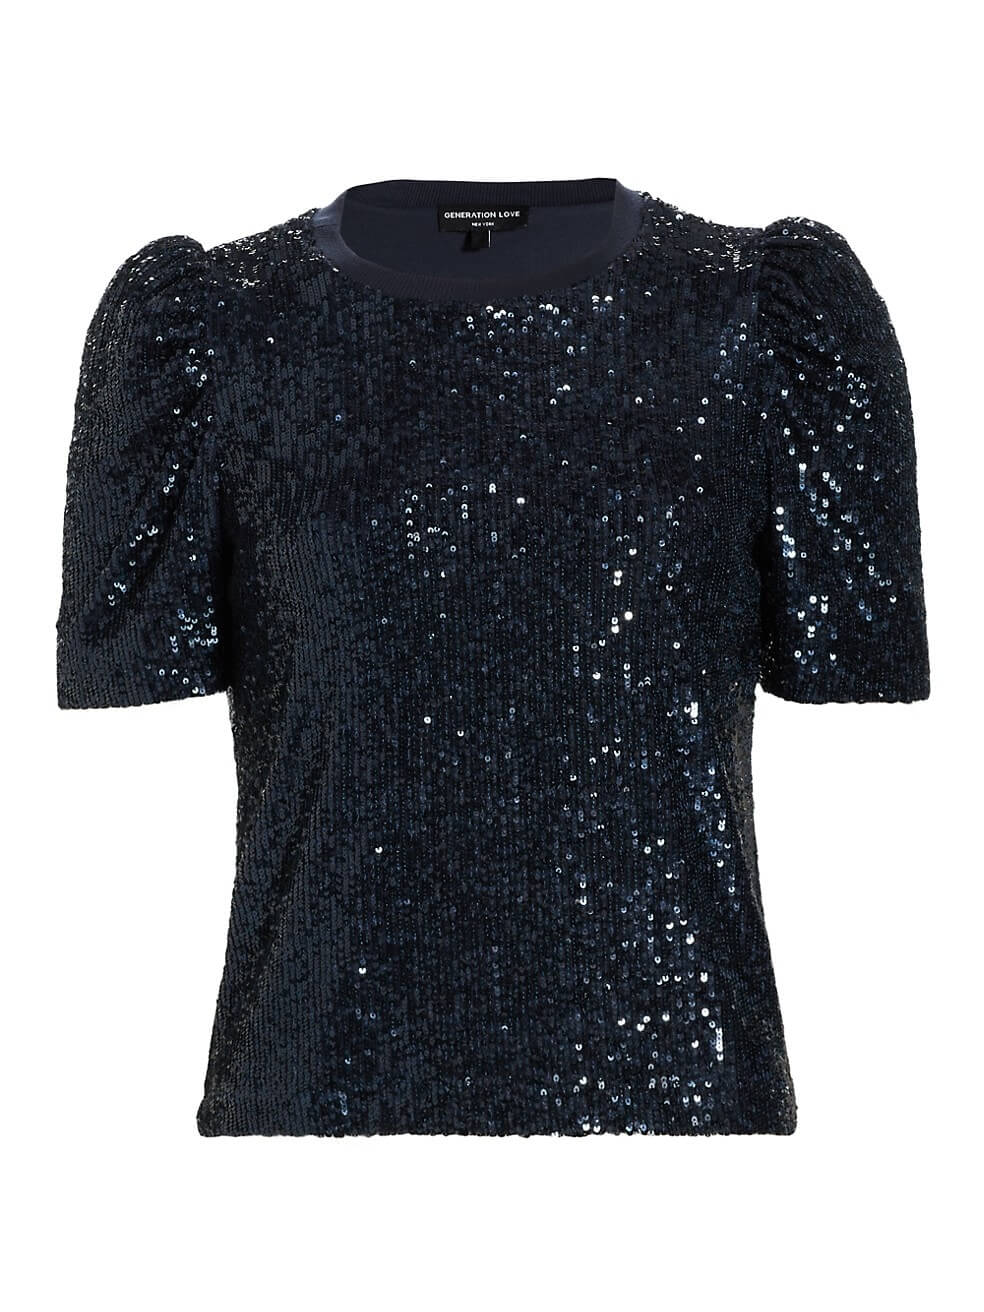 The Best Early Fall Pieces By Generation Love sequin puff sleeve top (navy) how to wear sequins this fall how to wear sequins with jeans how to wear sequins during the day